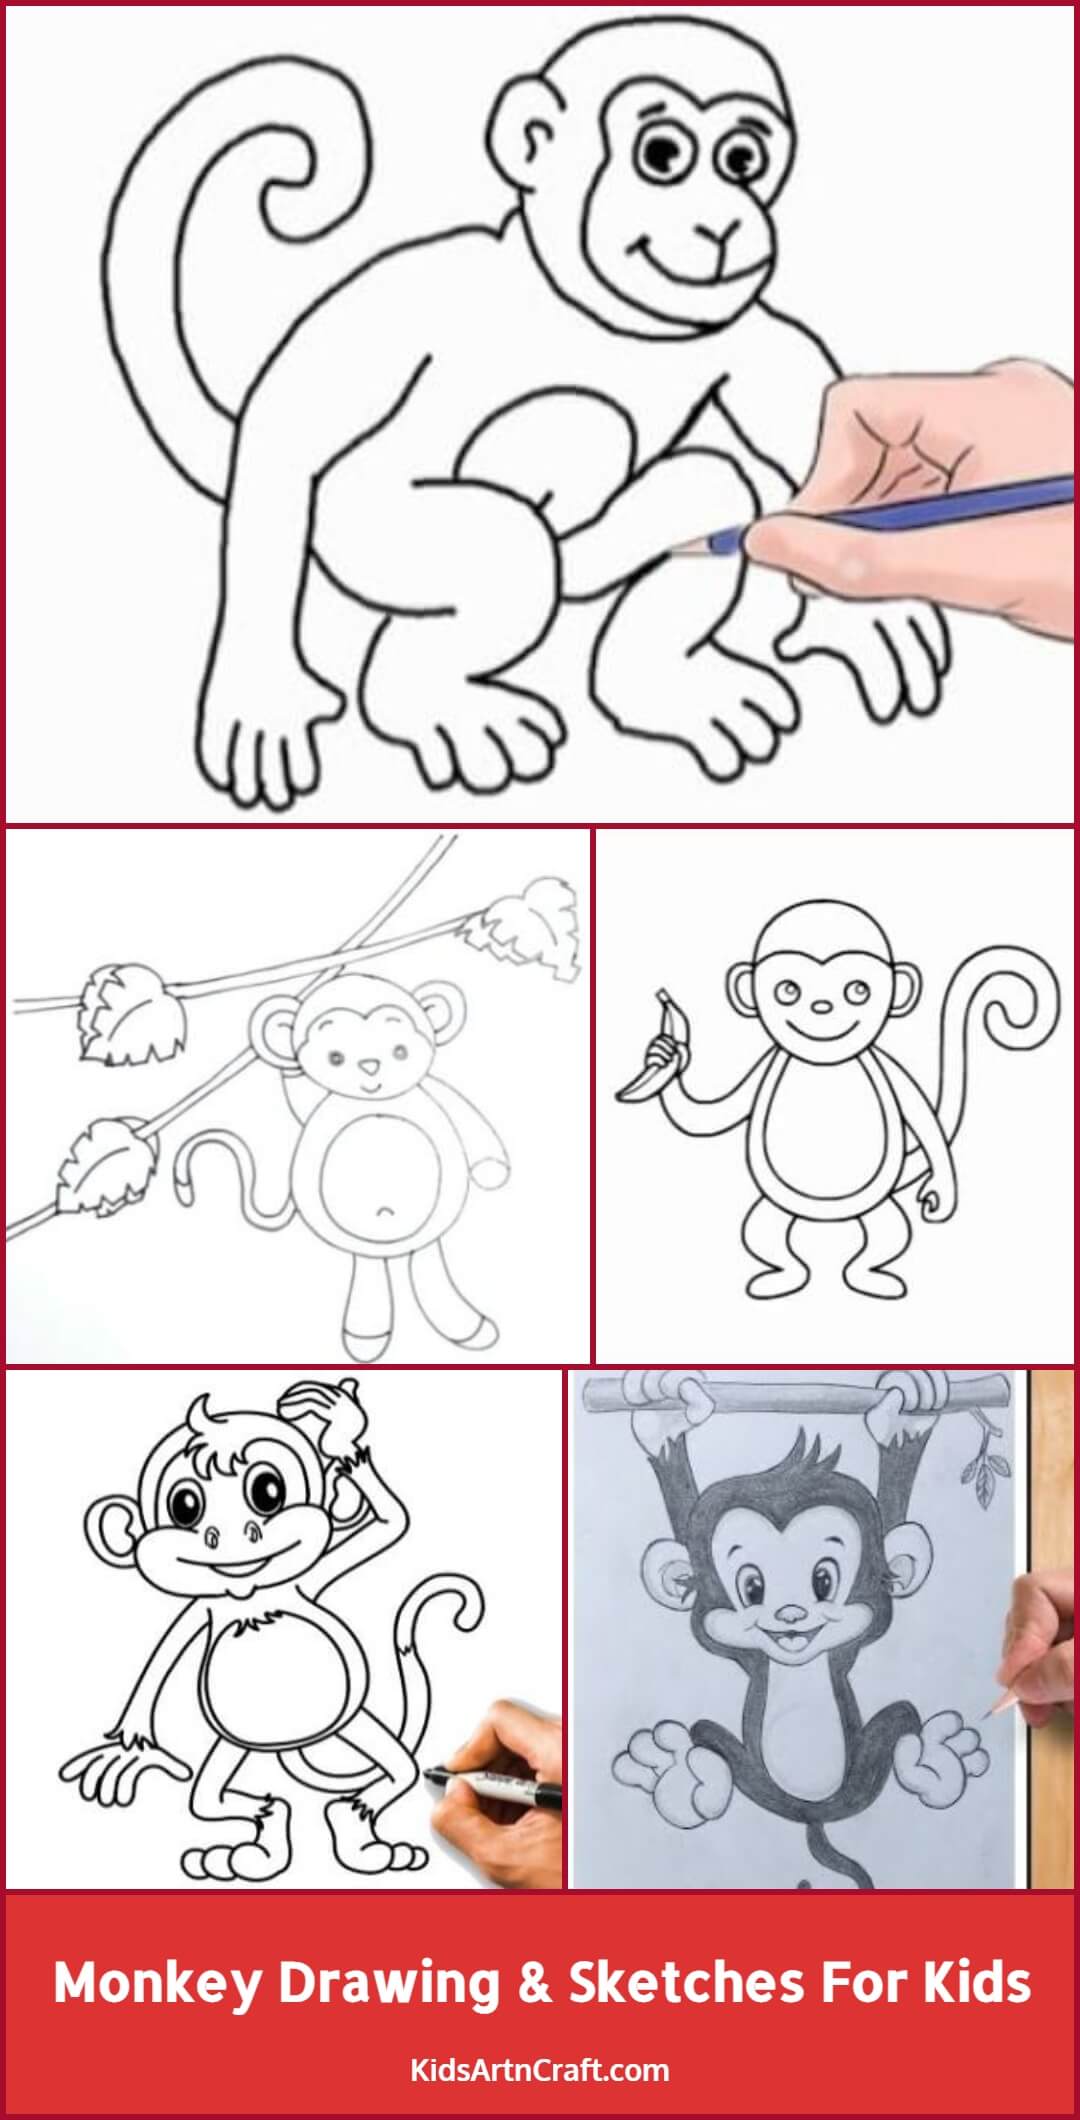 Monkey Drawing & Sketches For Kids